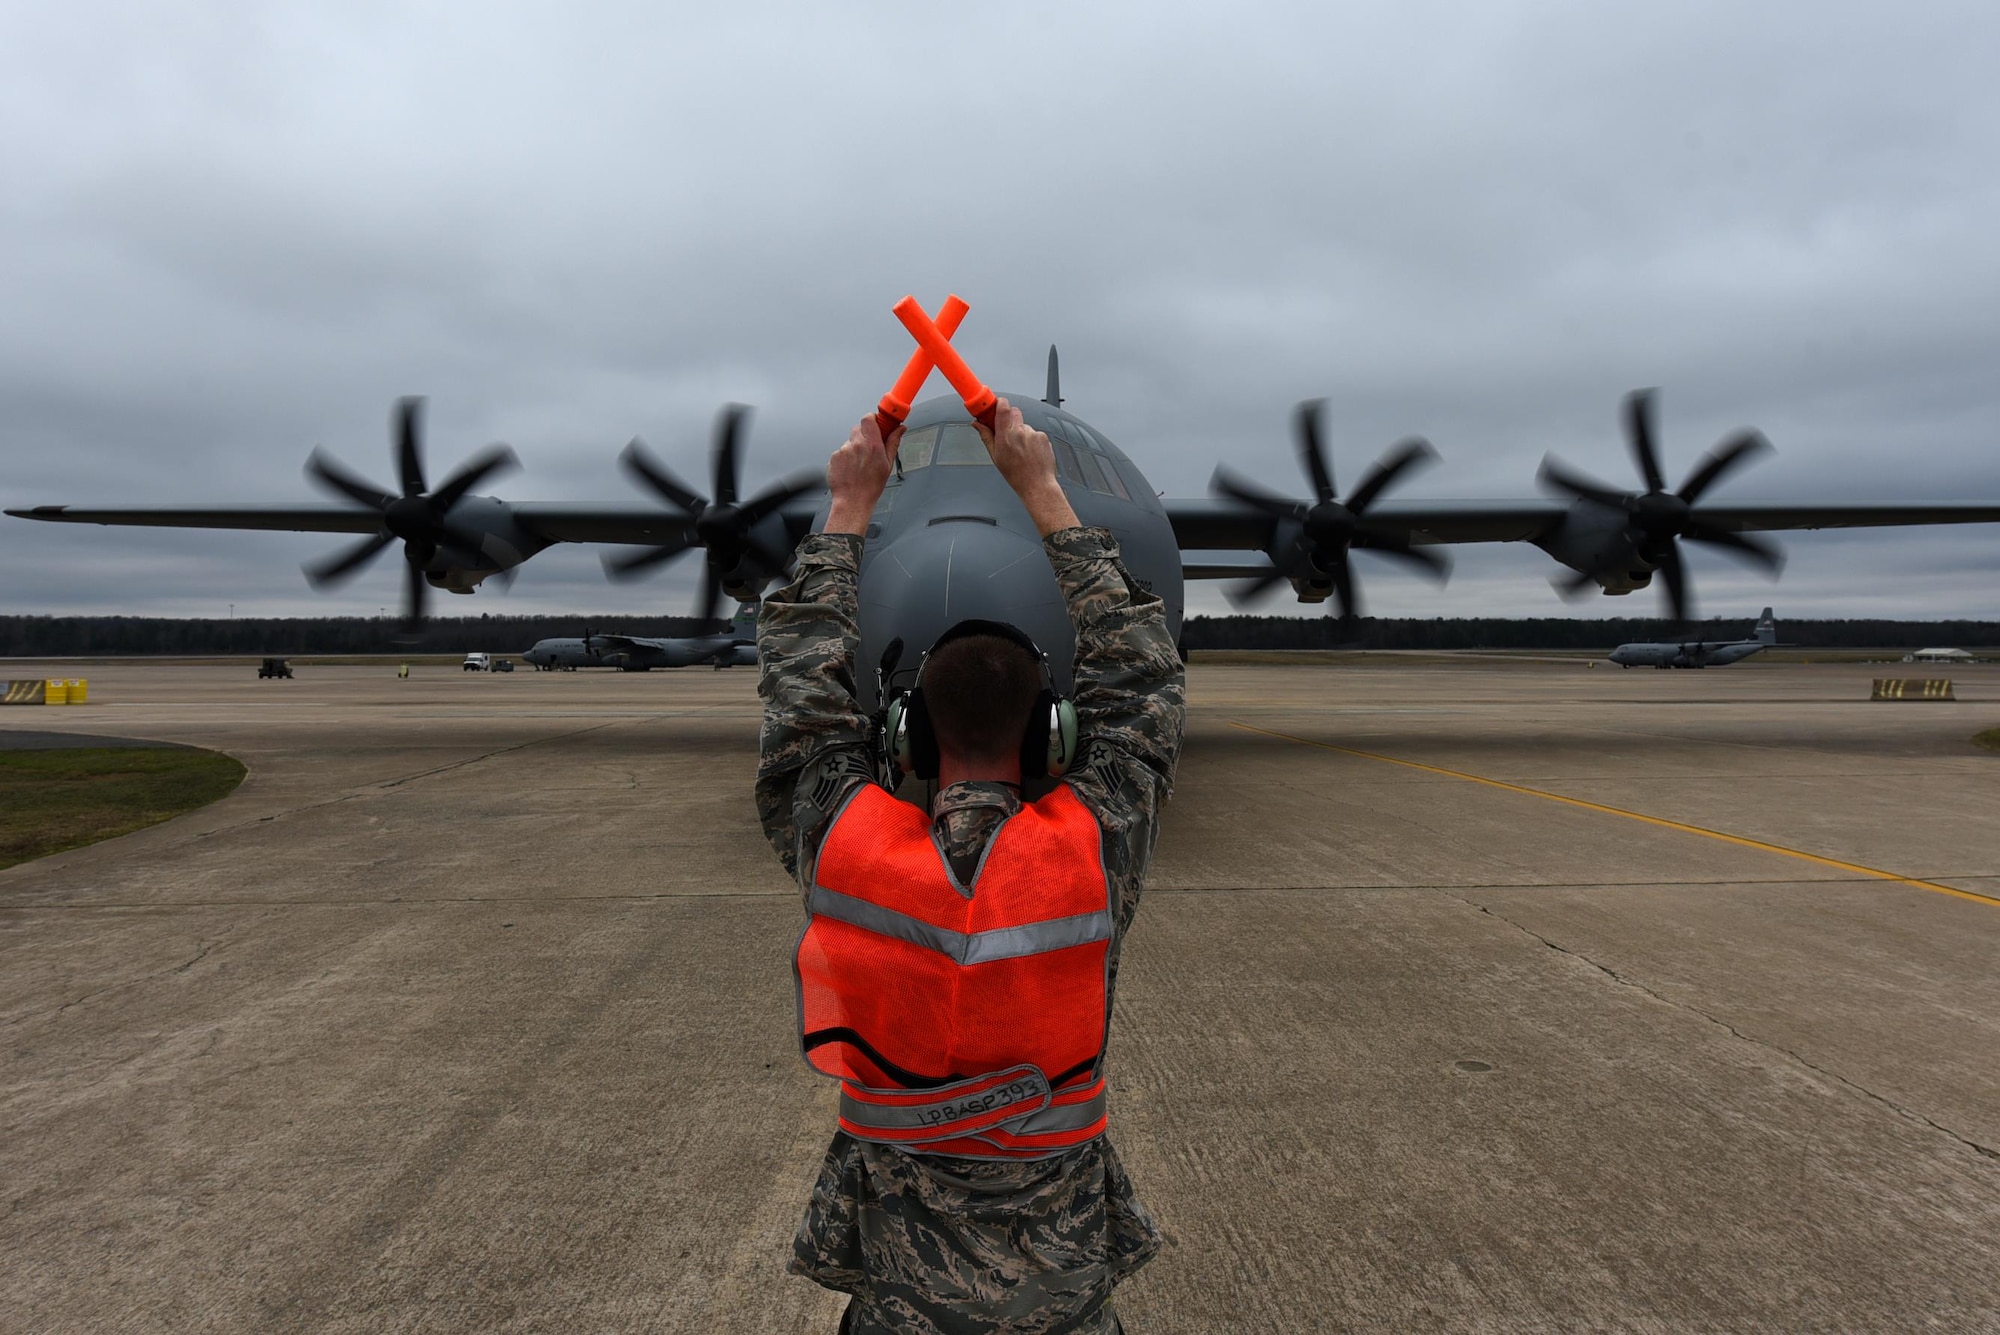 A 314th Aircraft Maintenance Squadron Airman marshals a C-130J delivered from the Lockheed Martin facility Feb. 27, 2017, at Little Rock Air Force Base, Ark. U.S. Air Force Maj. Gen. James Hecker, 19th Air Force commander, delivered the final new C-130J to the 314th Airlift Wing’s fleet, completing the H- to J-model transition for the wing. (U.S. Air Force photo by Airman 1st Class Kevin Sommer Giron)